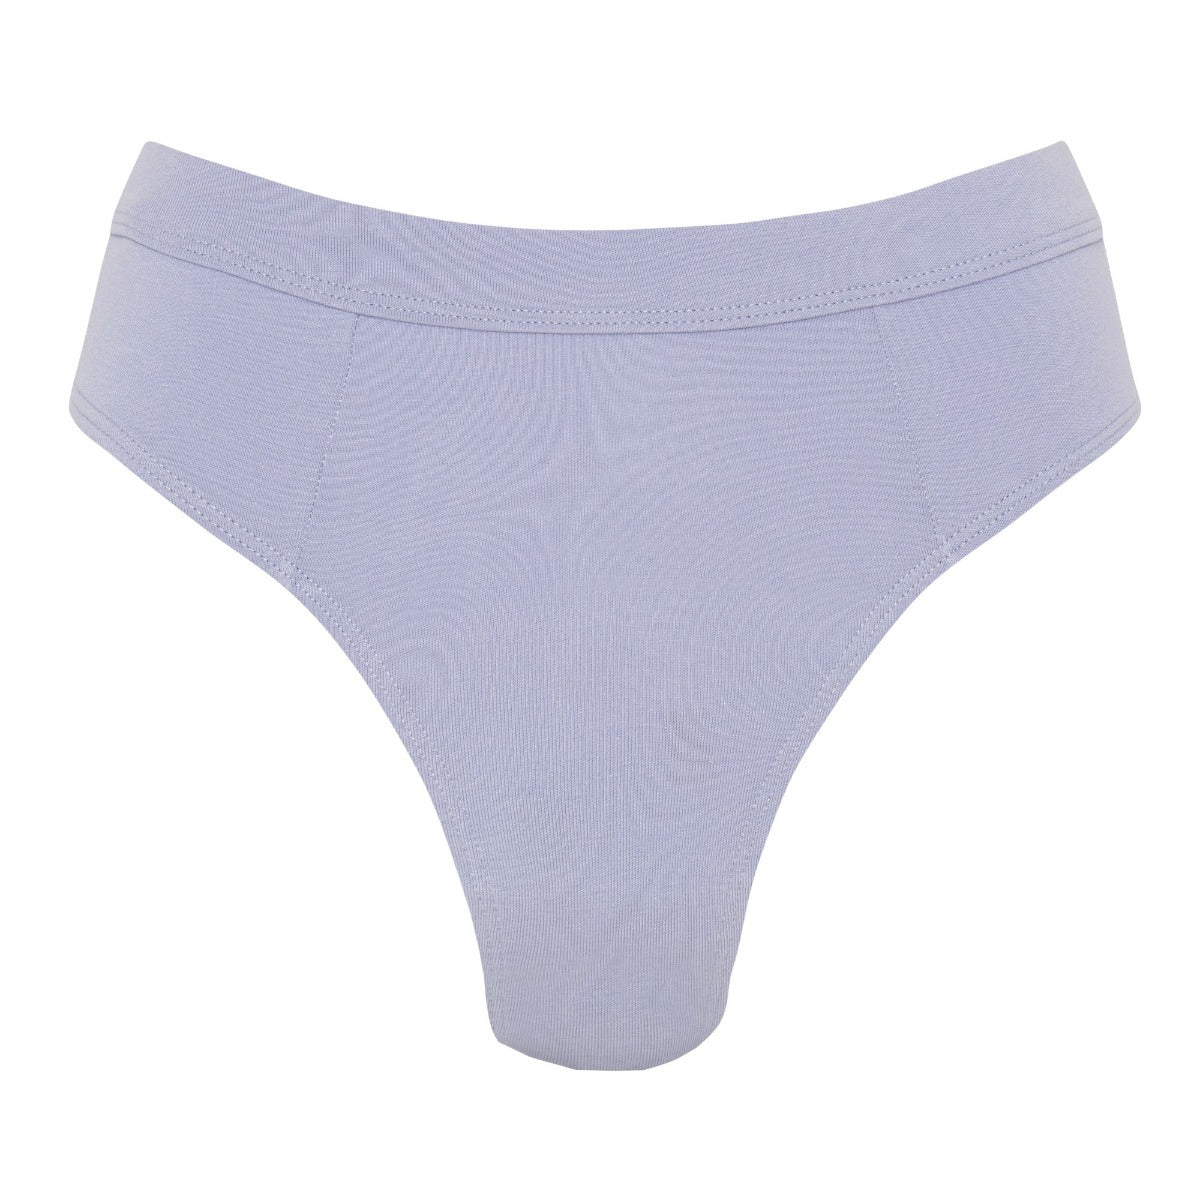 Moons & Junes: Cleo Organic Cotton High-Waisted Thong - Blue